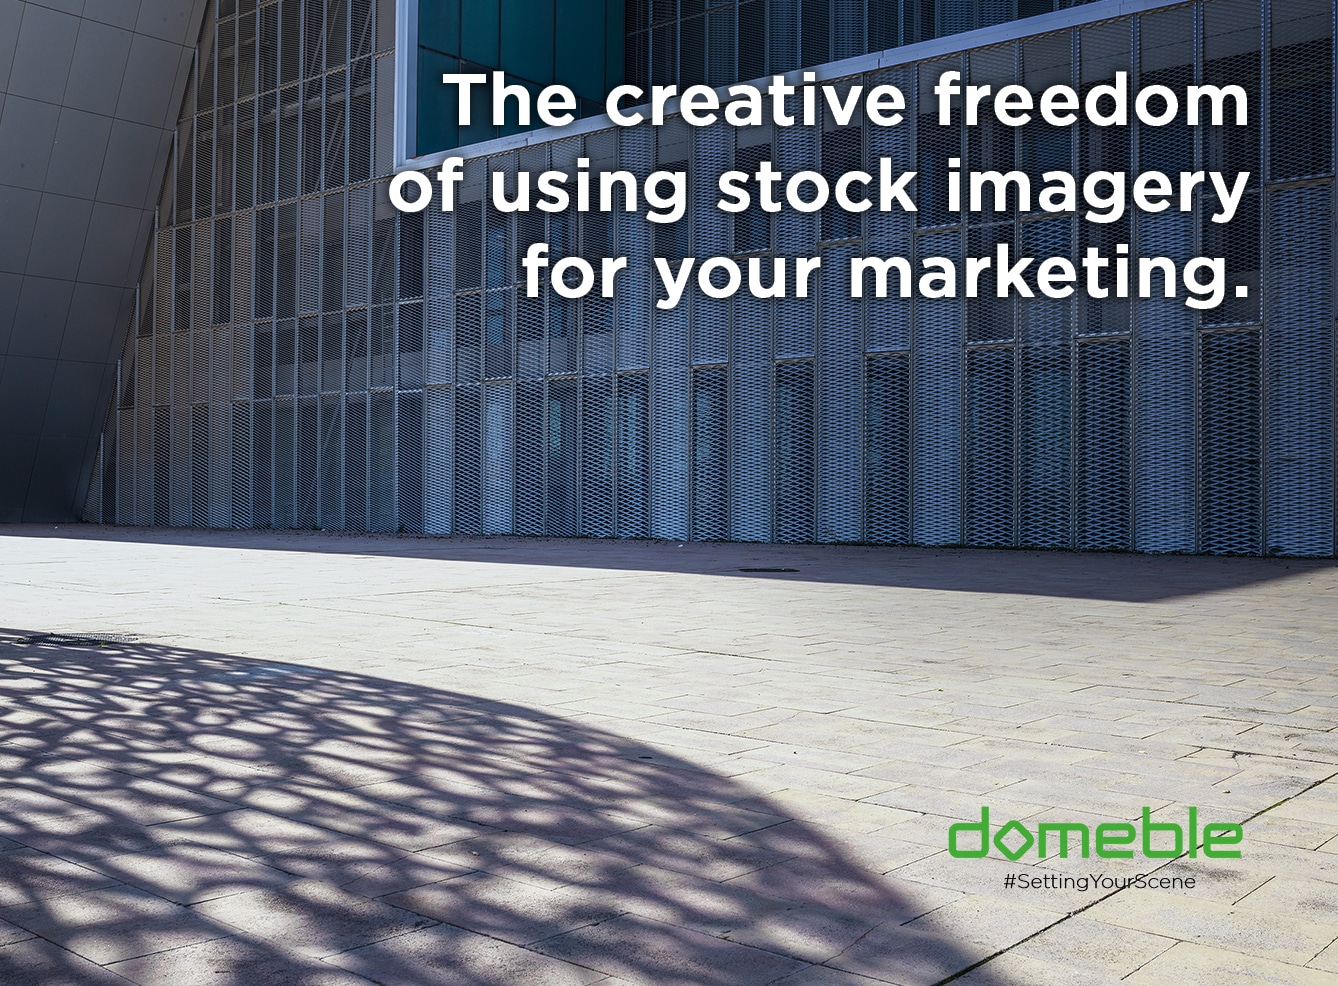 The creative freedom of using stock imagery for your marketing.